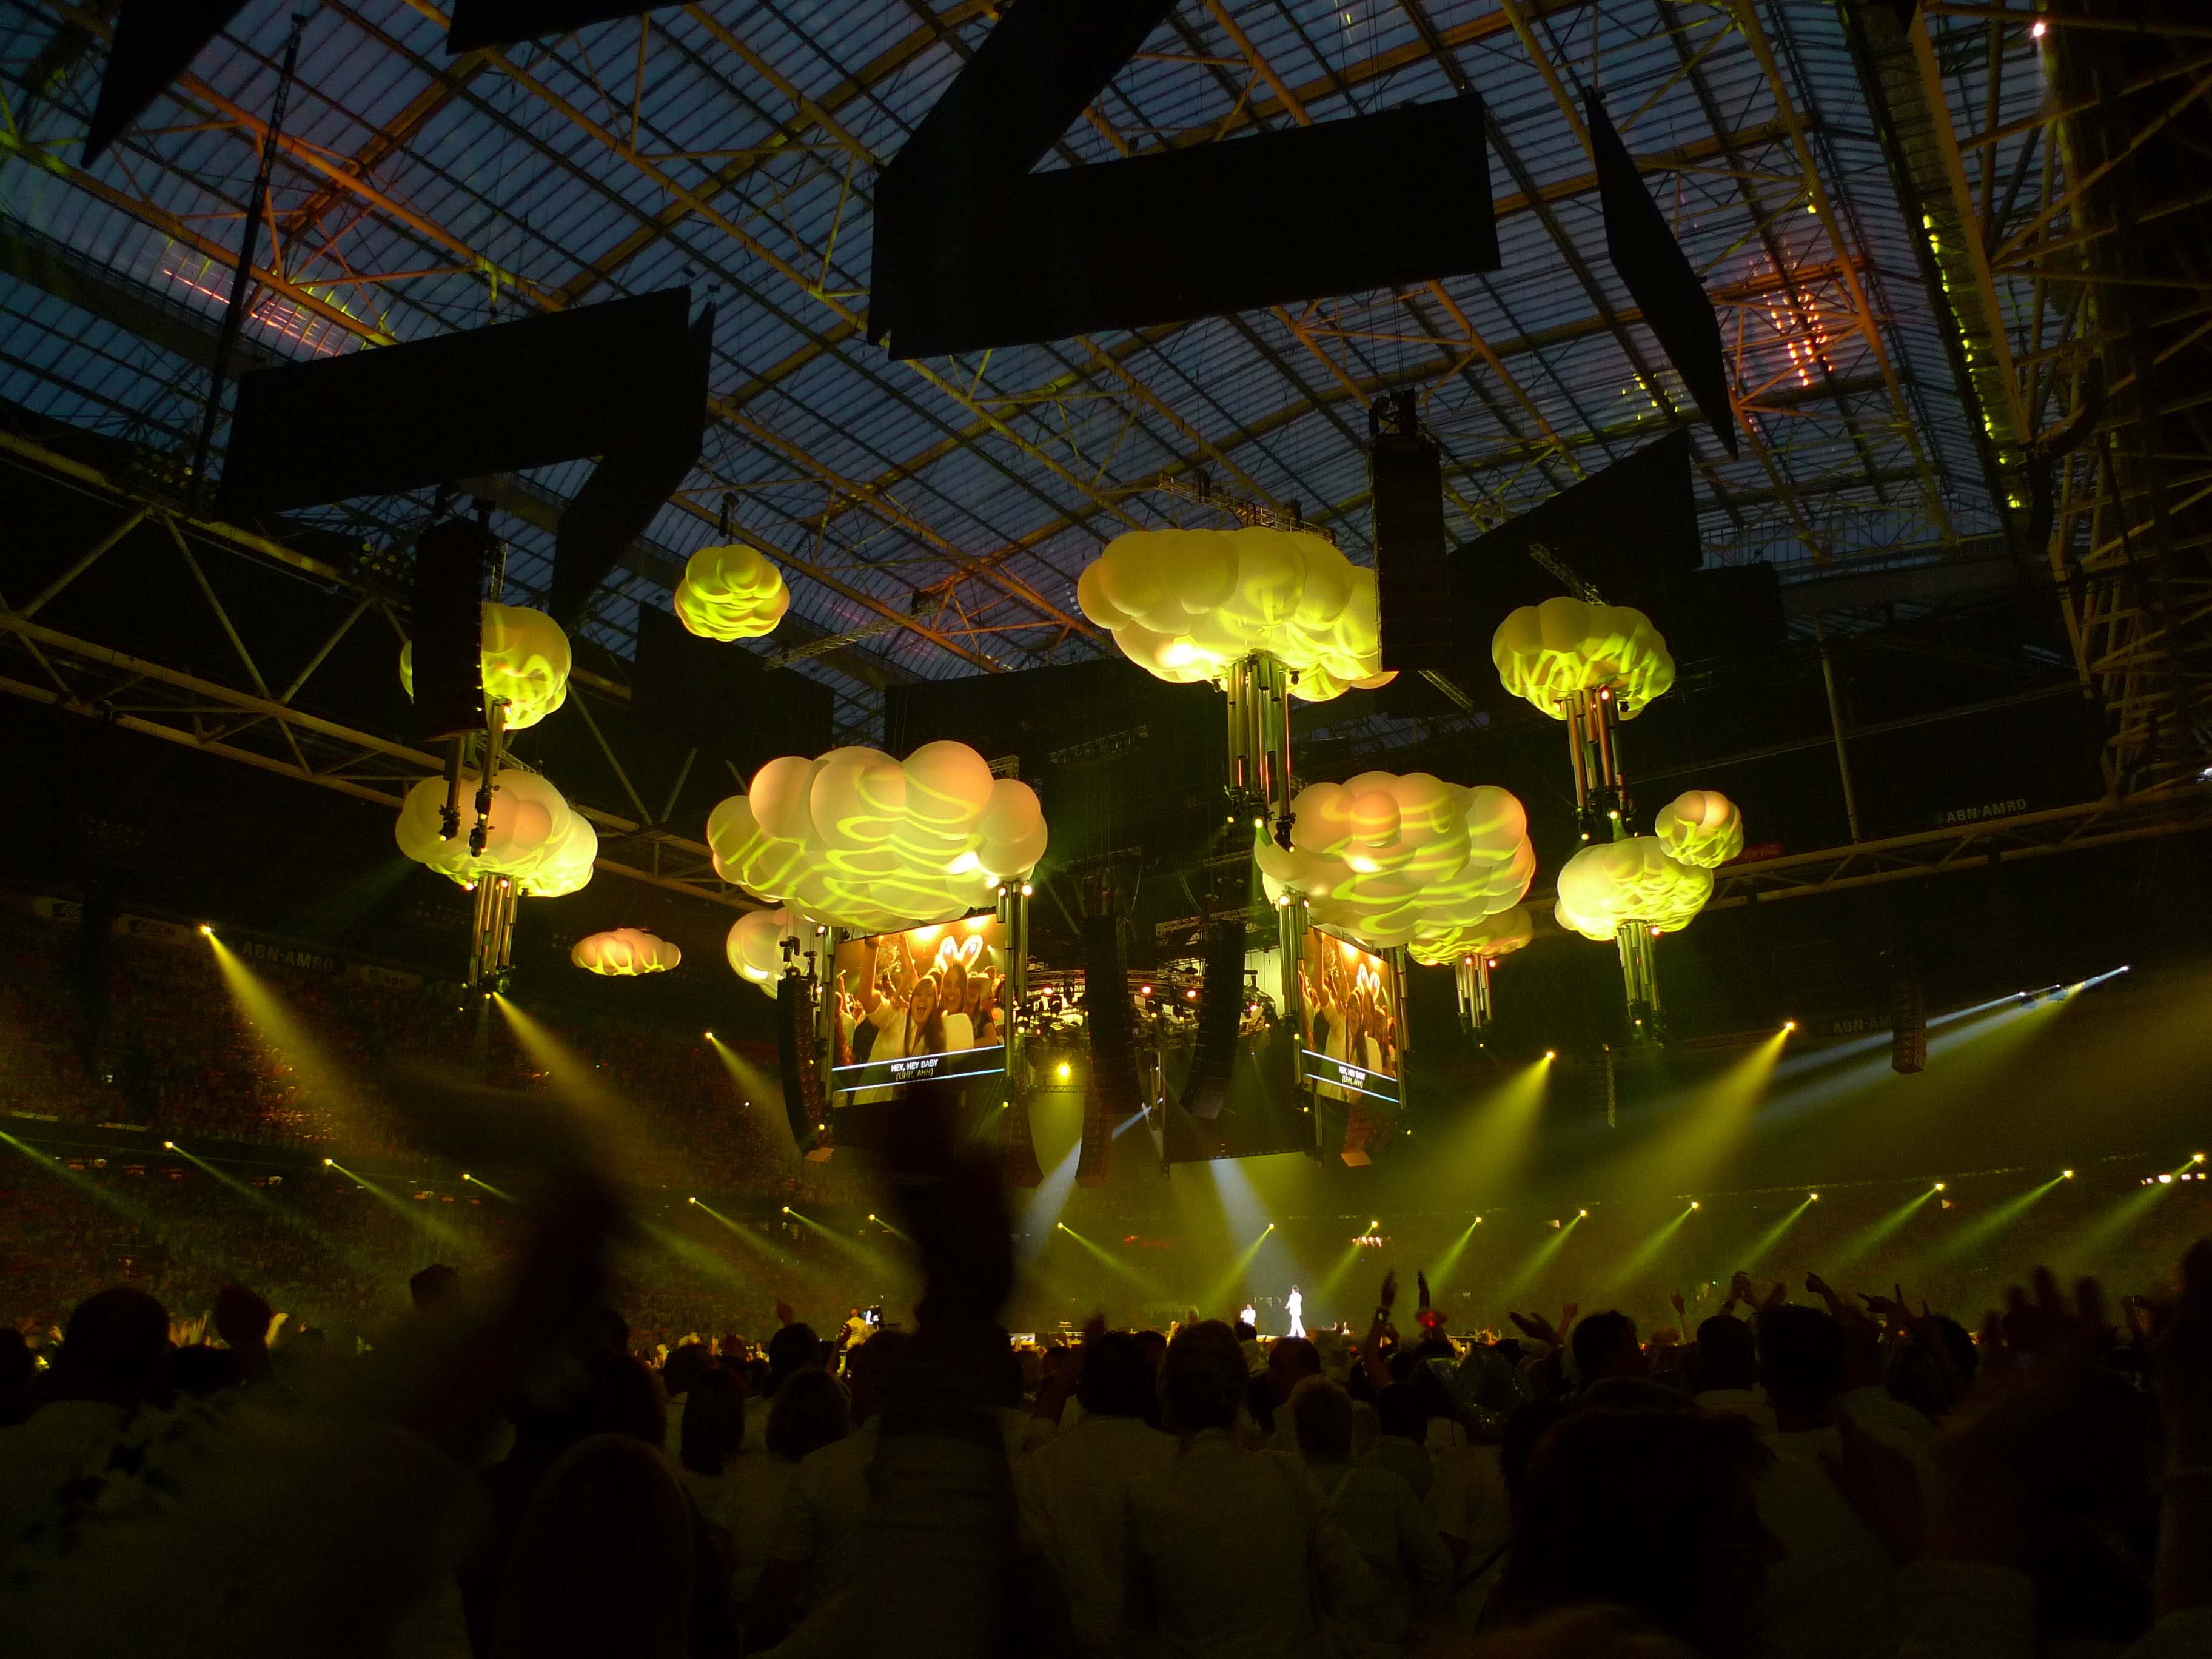 Inflatable clouds for Toppers 2010 in a stadium with large crowd below